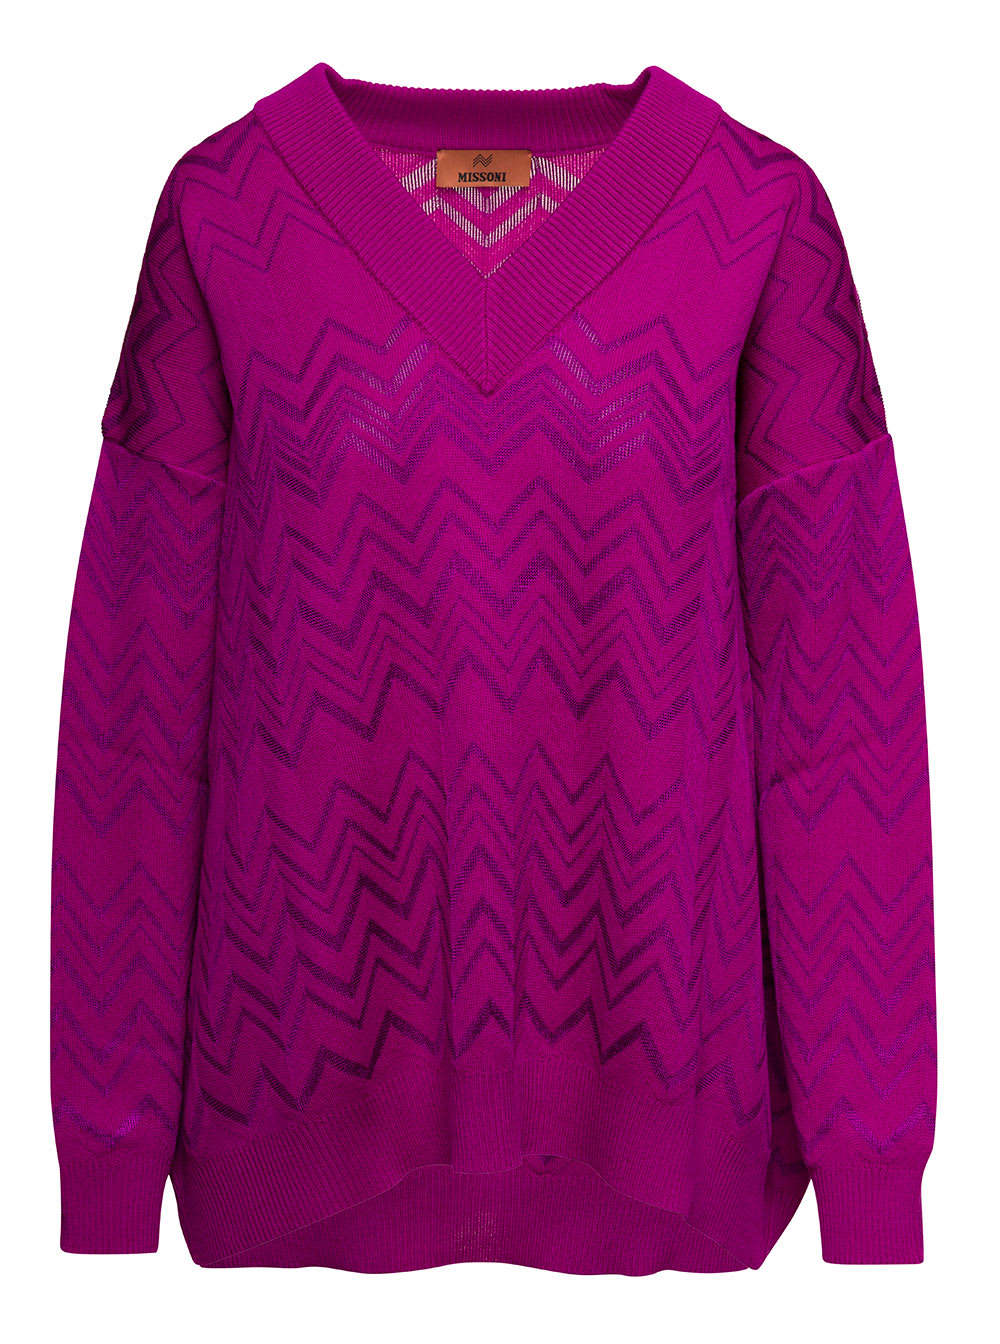 Wool Viscose Solid Colored Chevron V Neck Pull